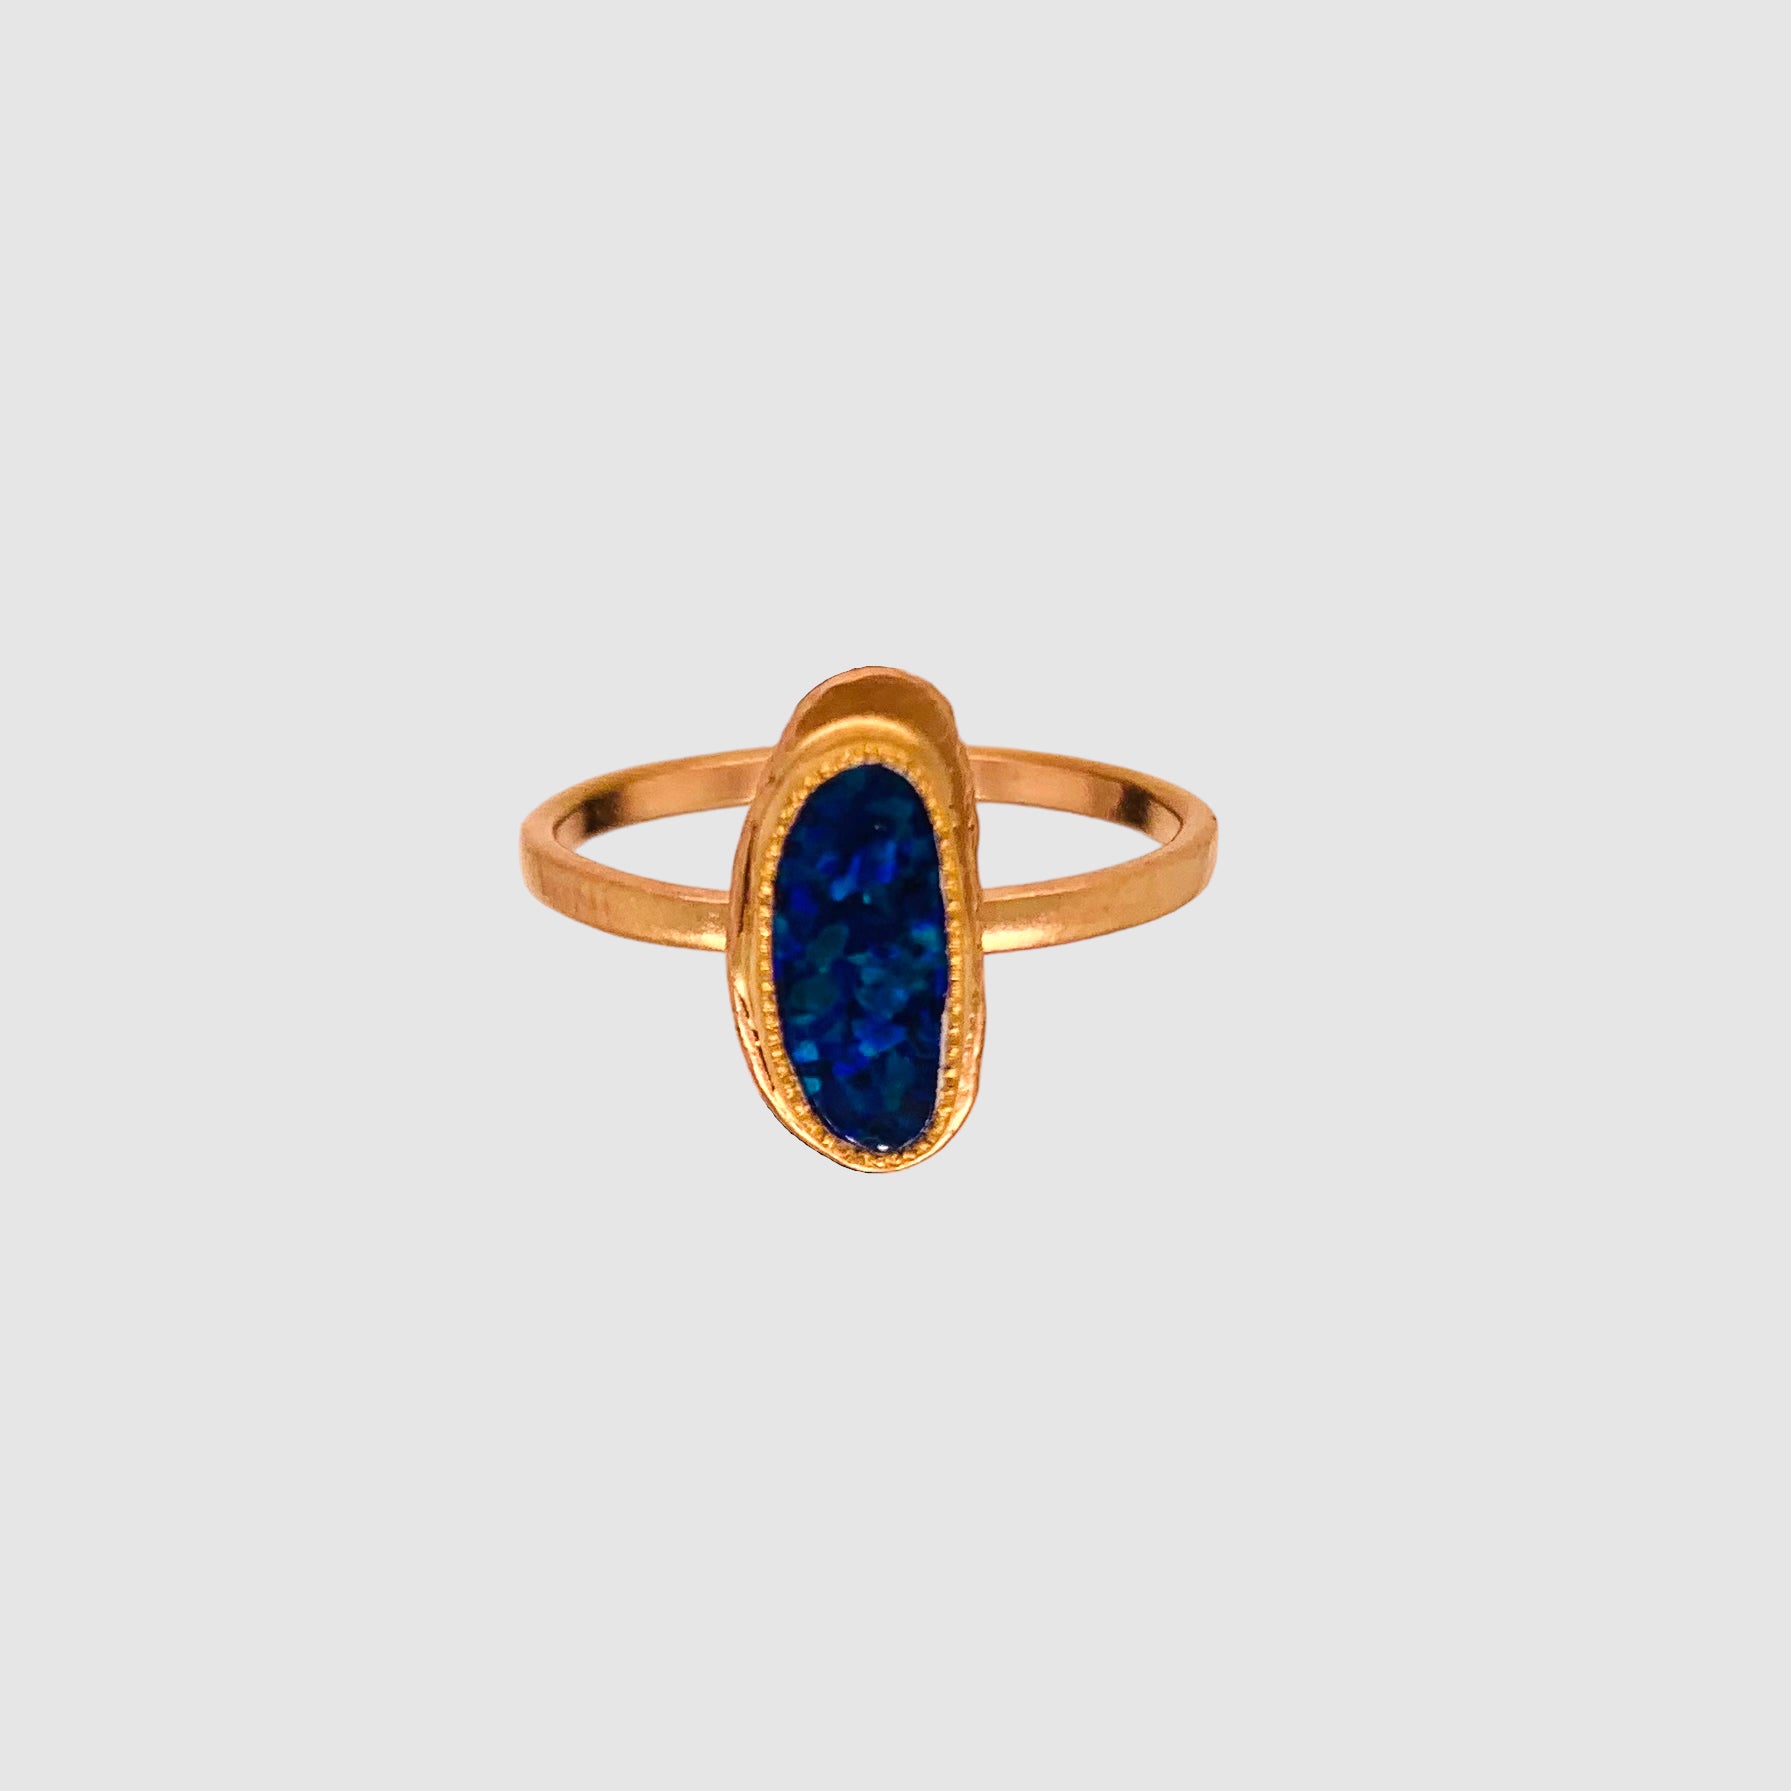 HEIRLOOM RING // SIMPLE // GOLD // BLUE OPAL